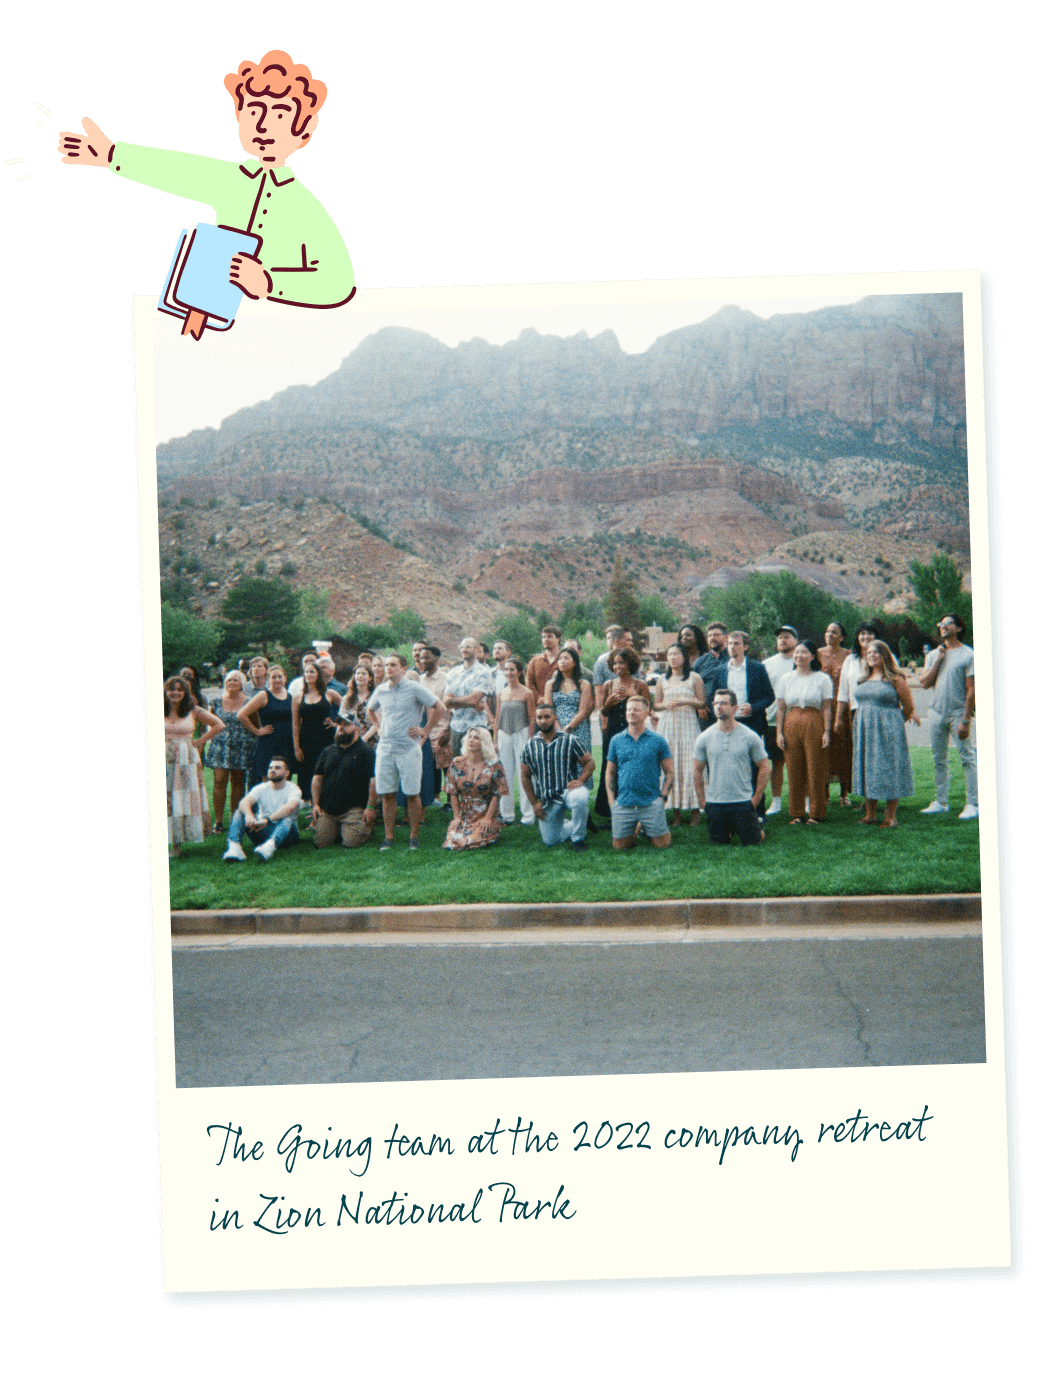 The Going team at the 2022 company retreat in Zion National Park